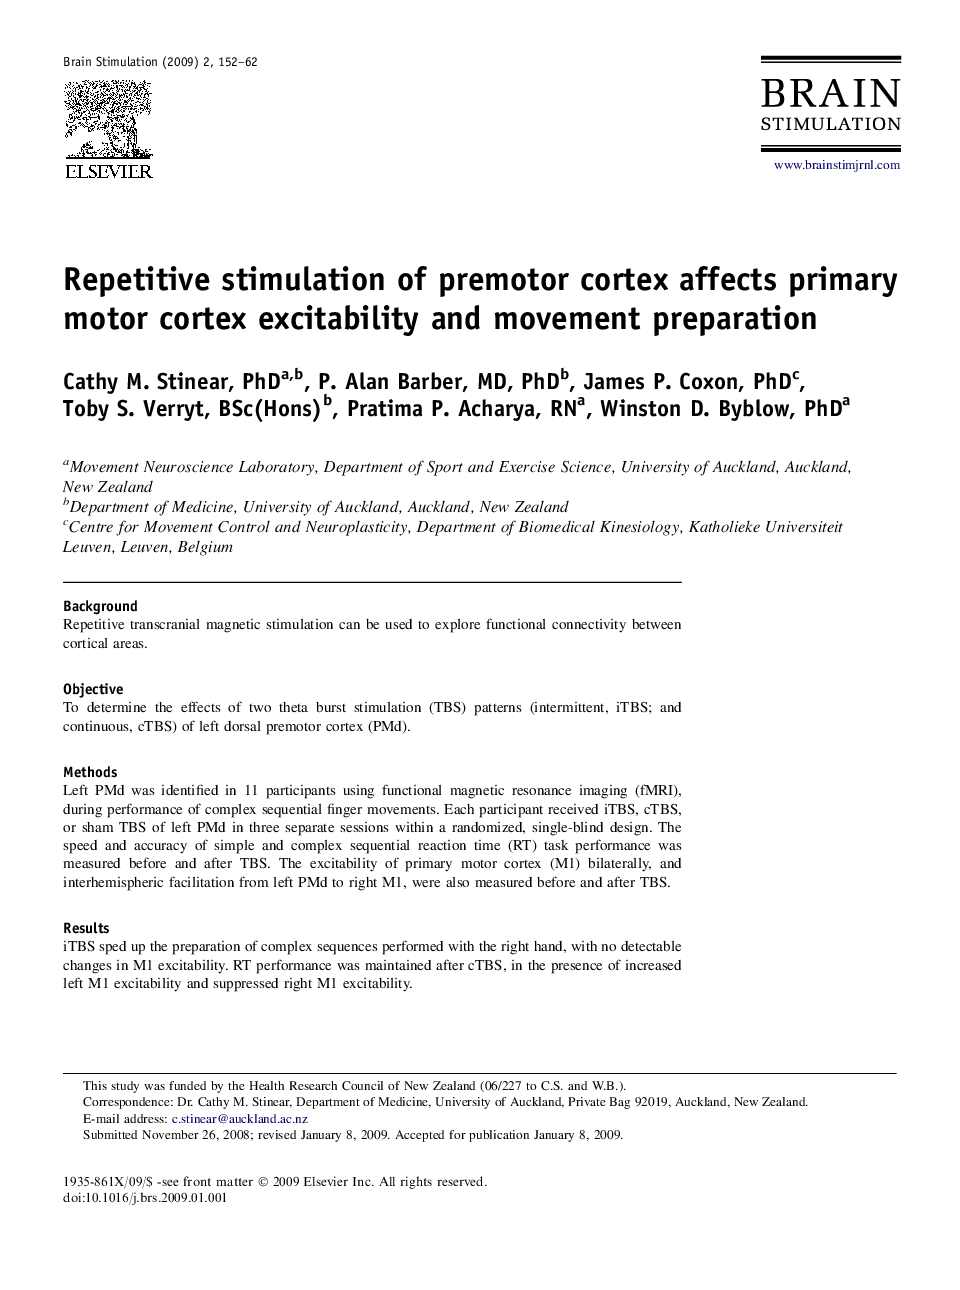 Repetitive stimulation of premotor cortex affects primary motor cortex excitability and movement preparation 